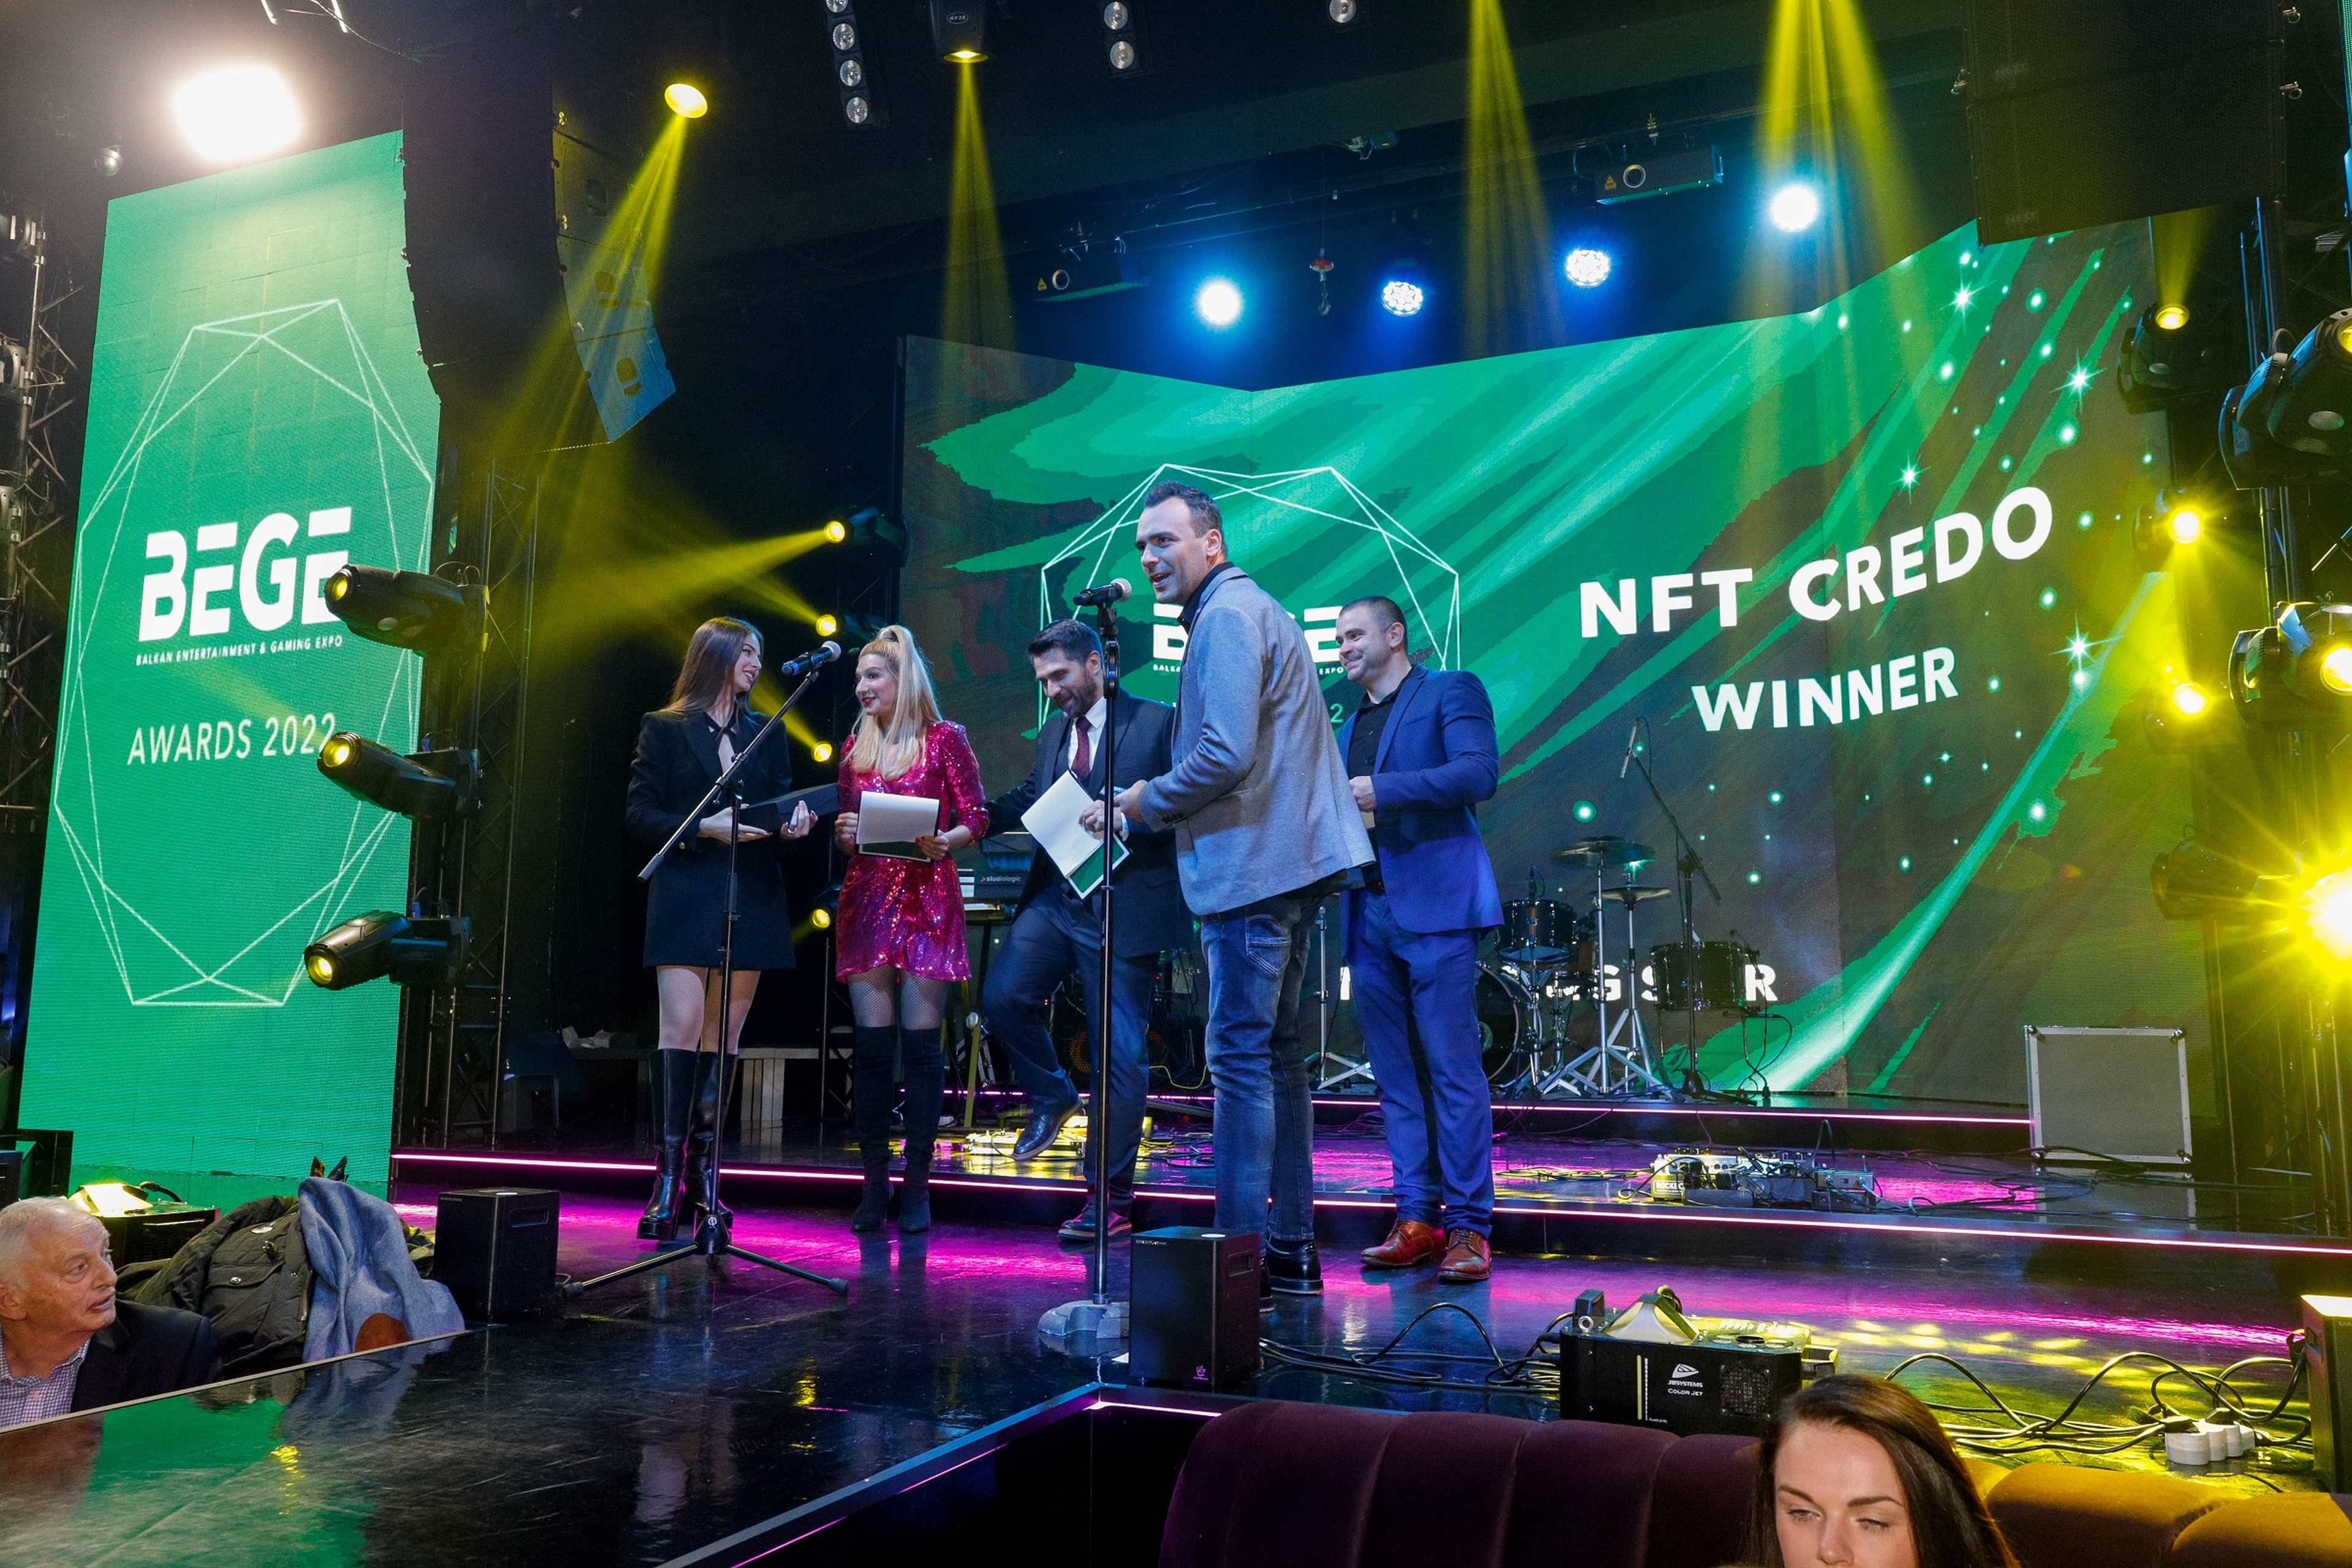 NFT Credo became a "Rising Star" at BeGe Expo 2022